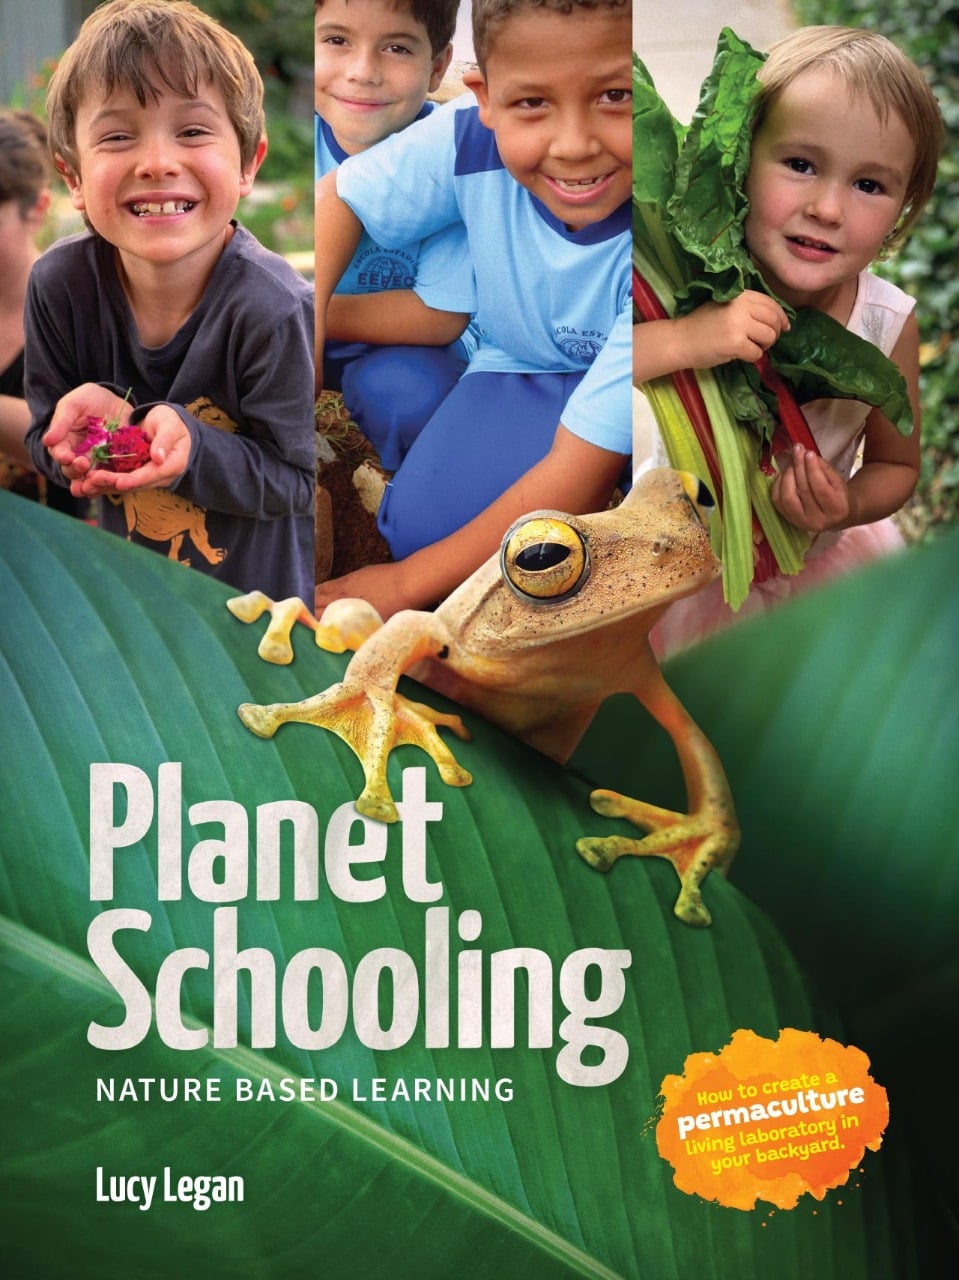 Planet Schooling with Lucy Legan and Morag Gamble | Our Permaculture Life